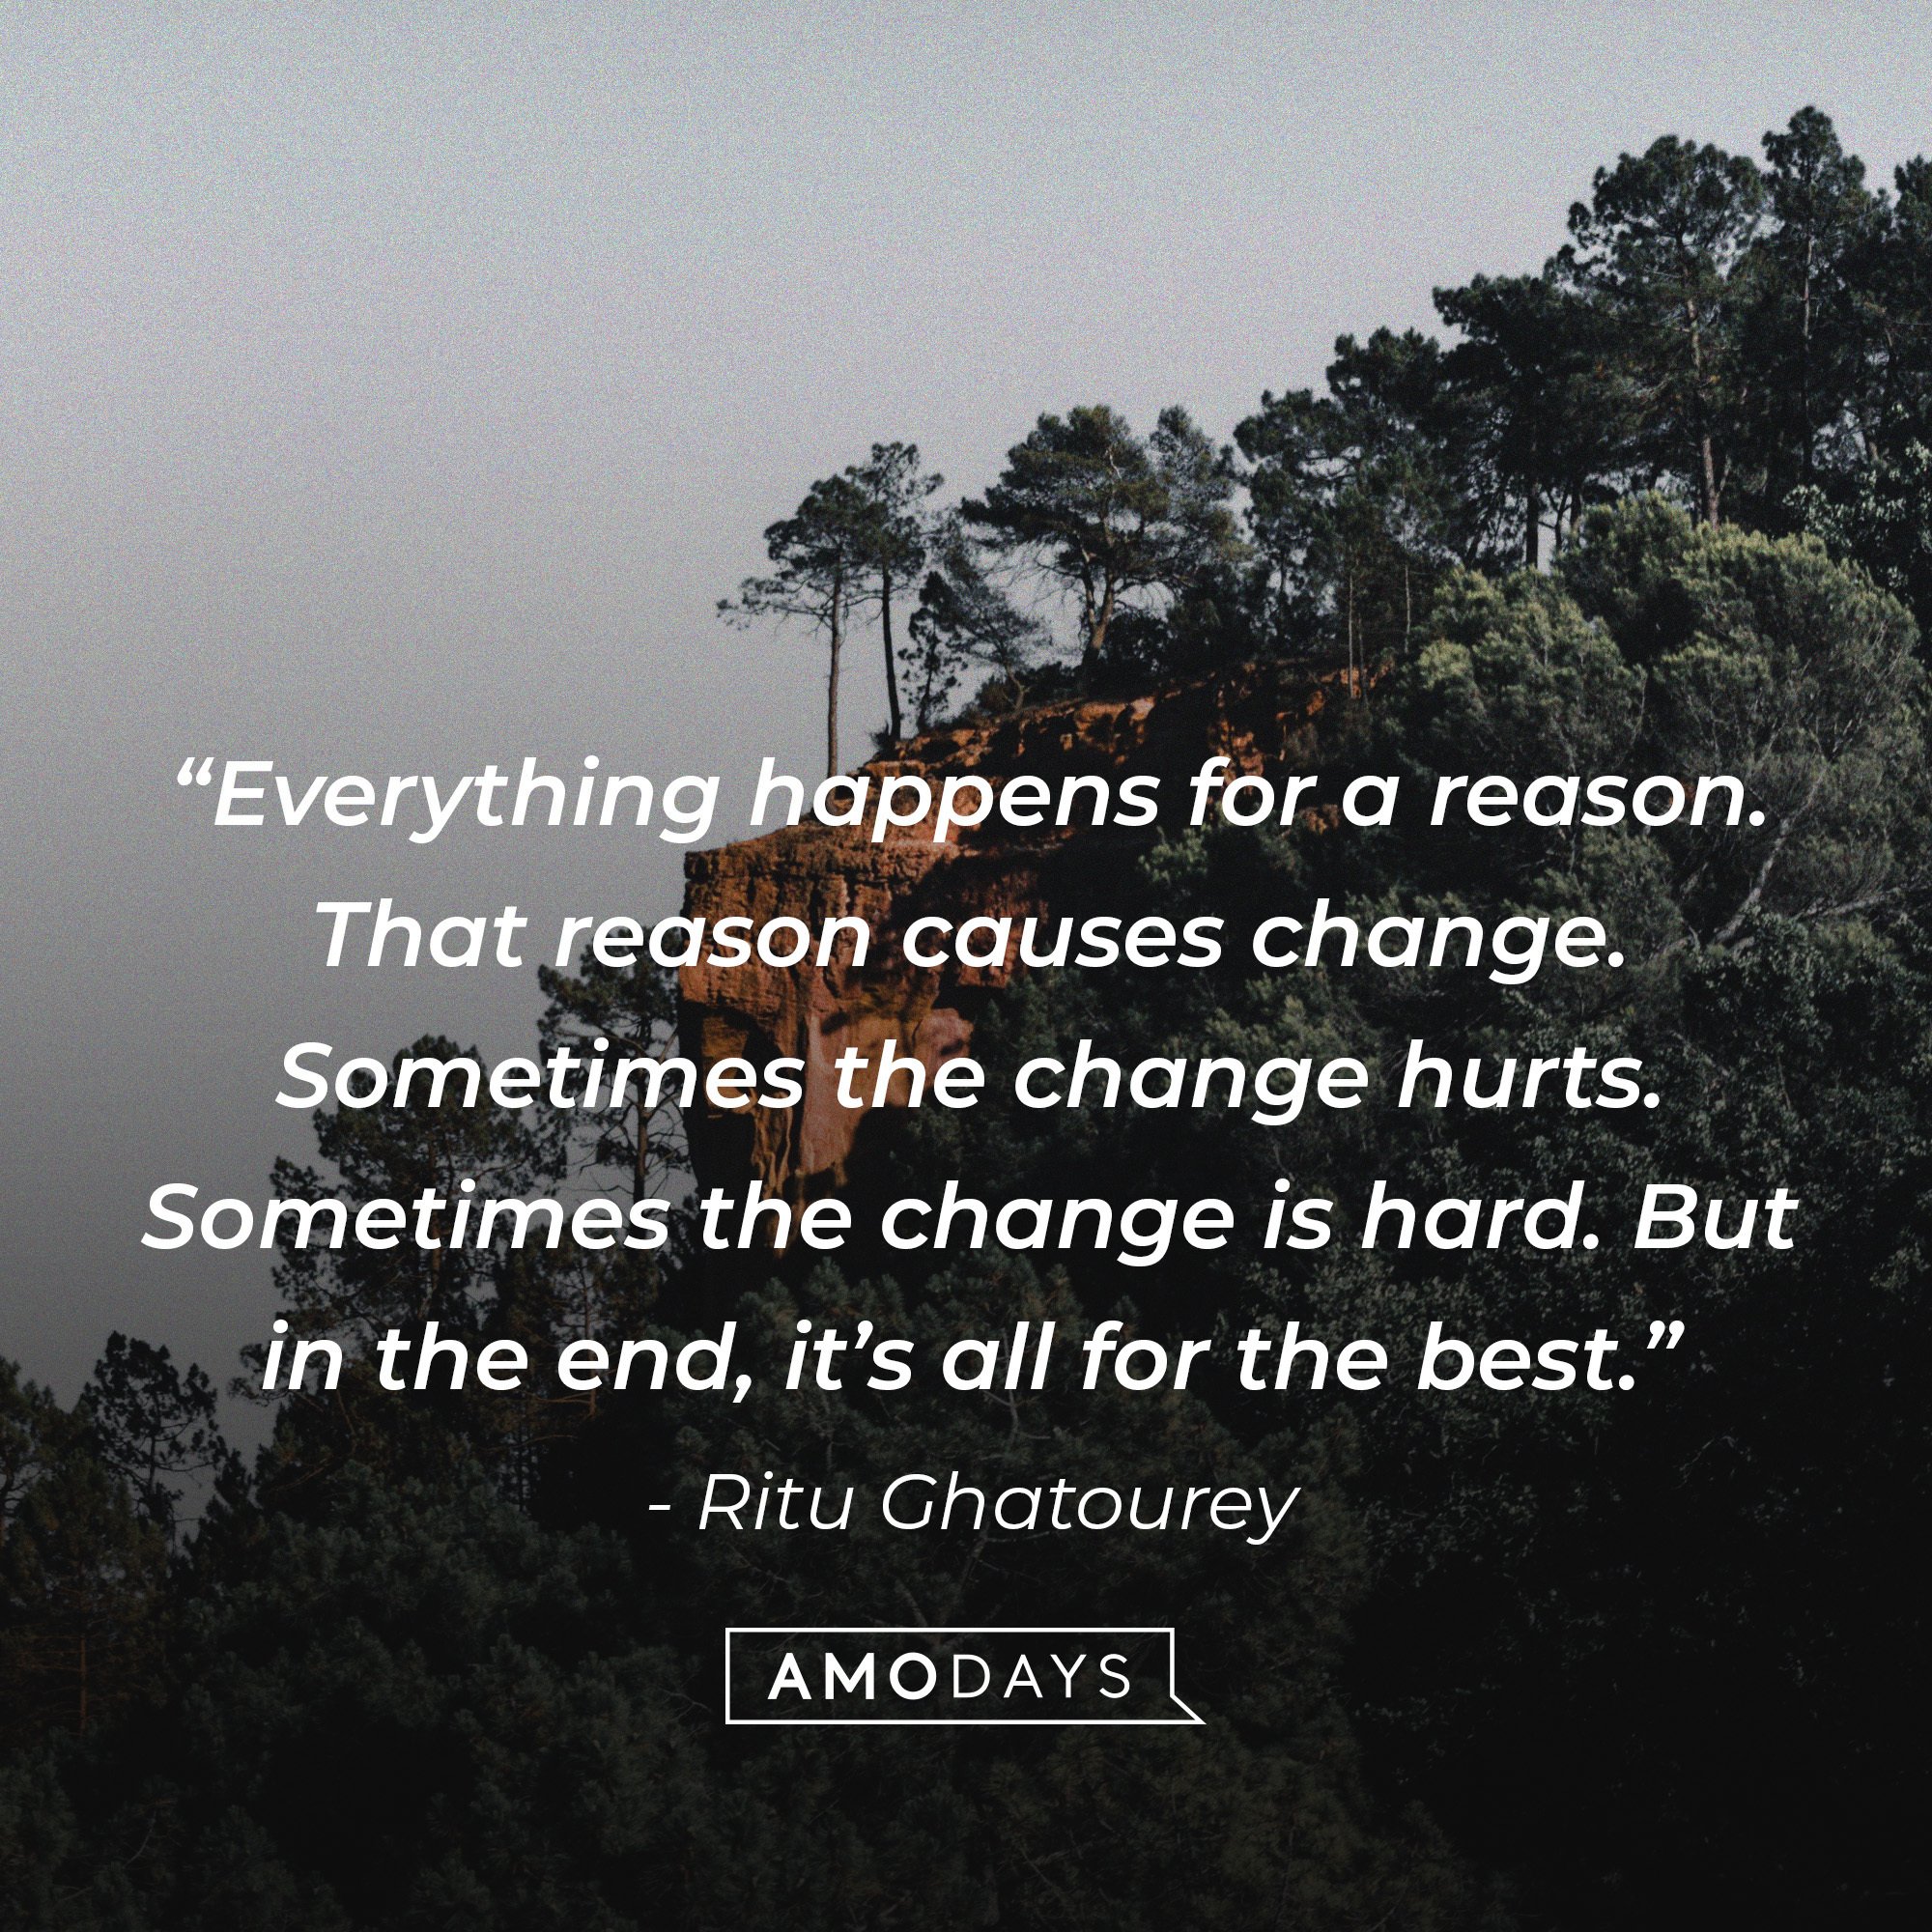  Ritu Ghatourey;s quote: “Everything happens for a reason. That reason causes change. Sometimes the change hurts. Sometimes the change is hard. But in the end, it’s all for the best.” | Image: AmoDays